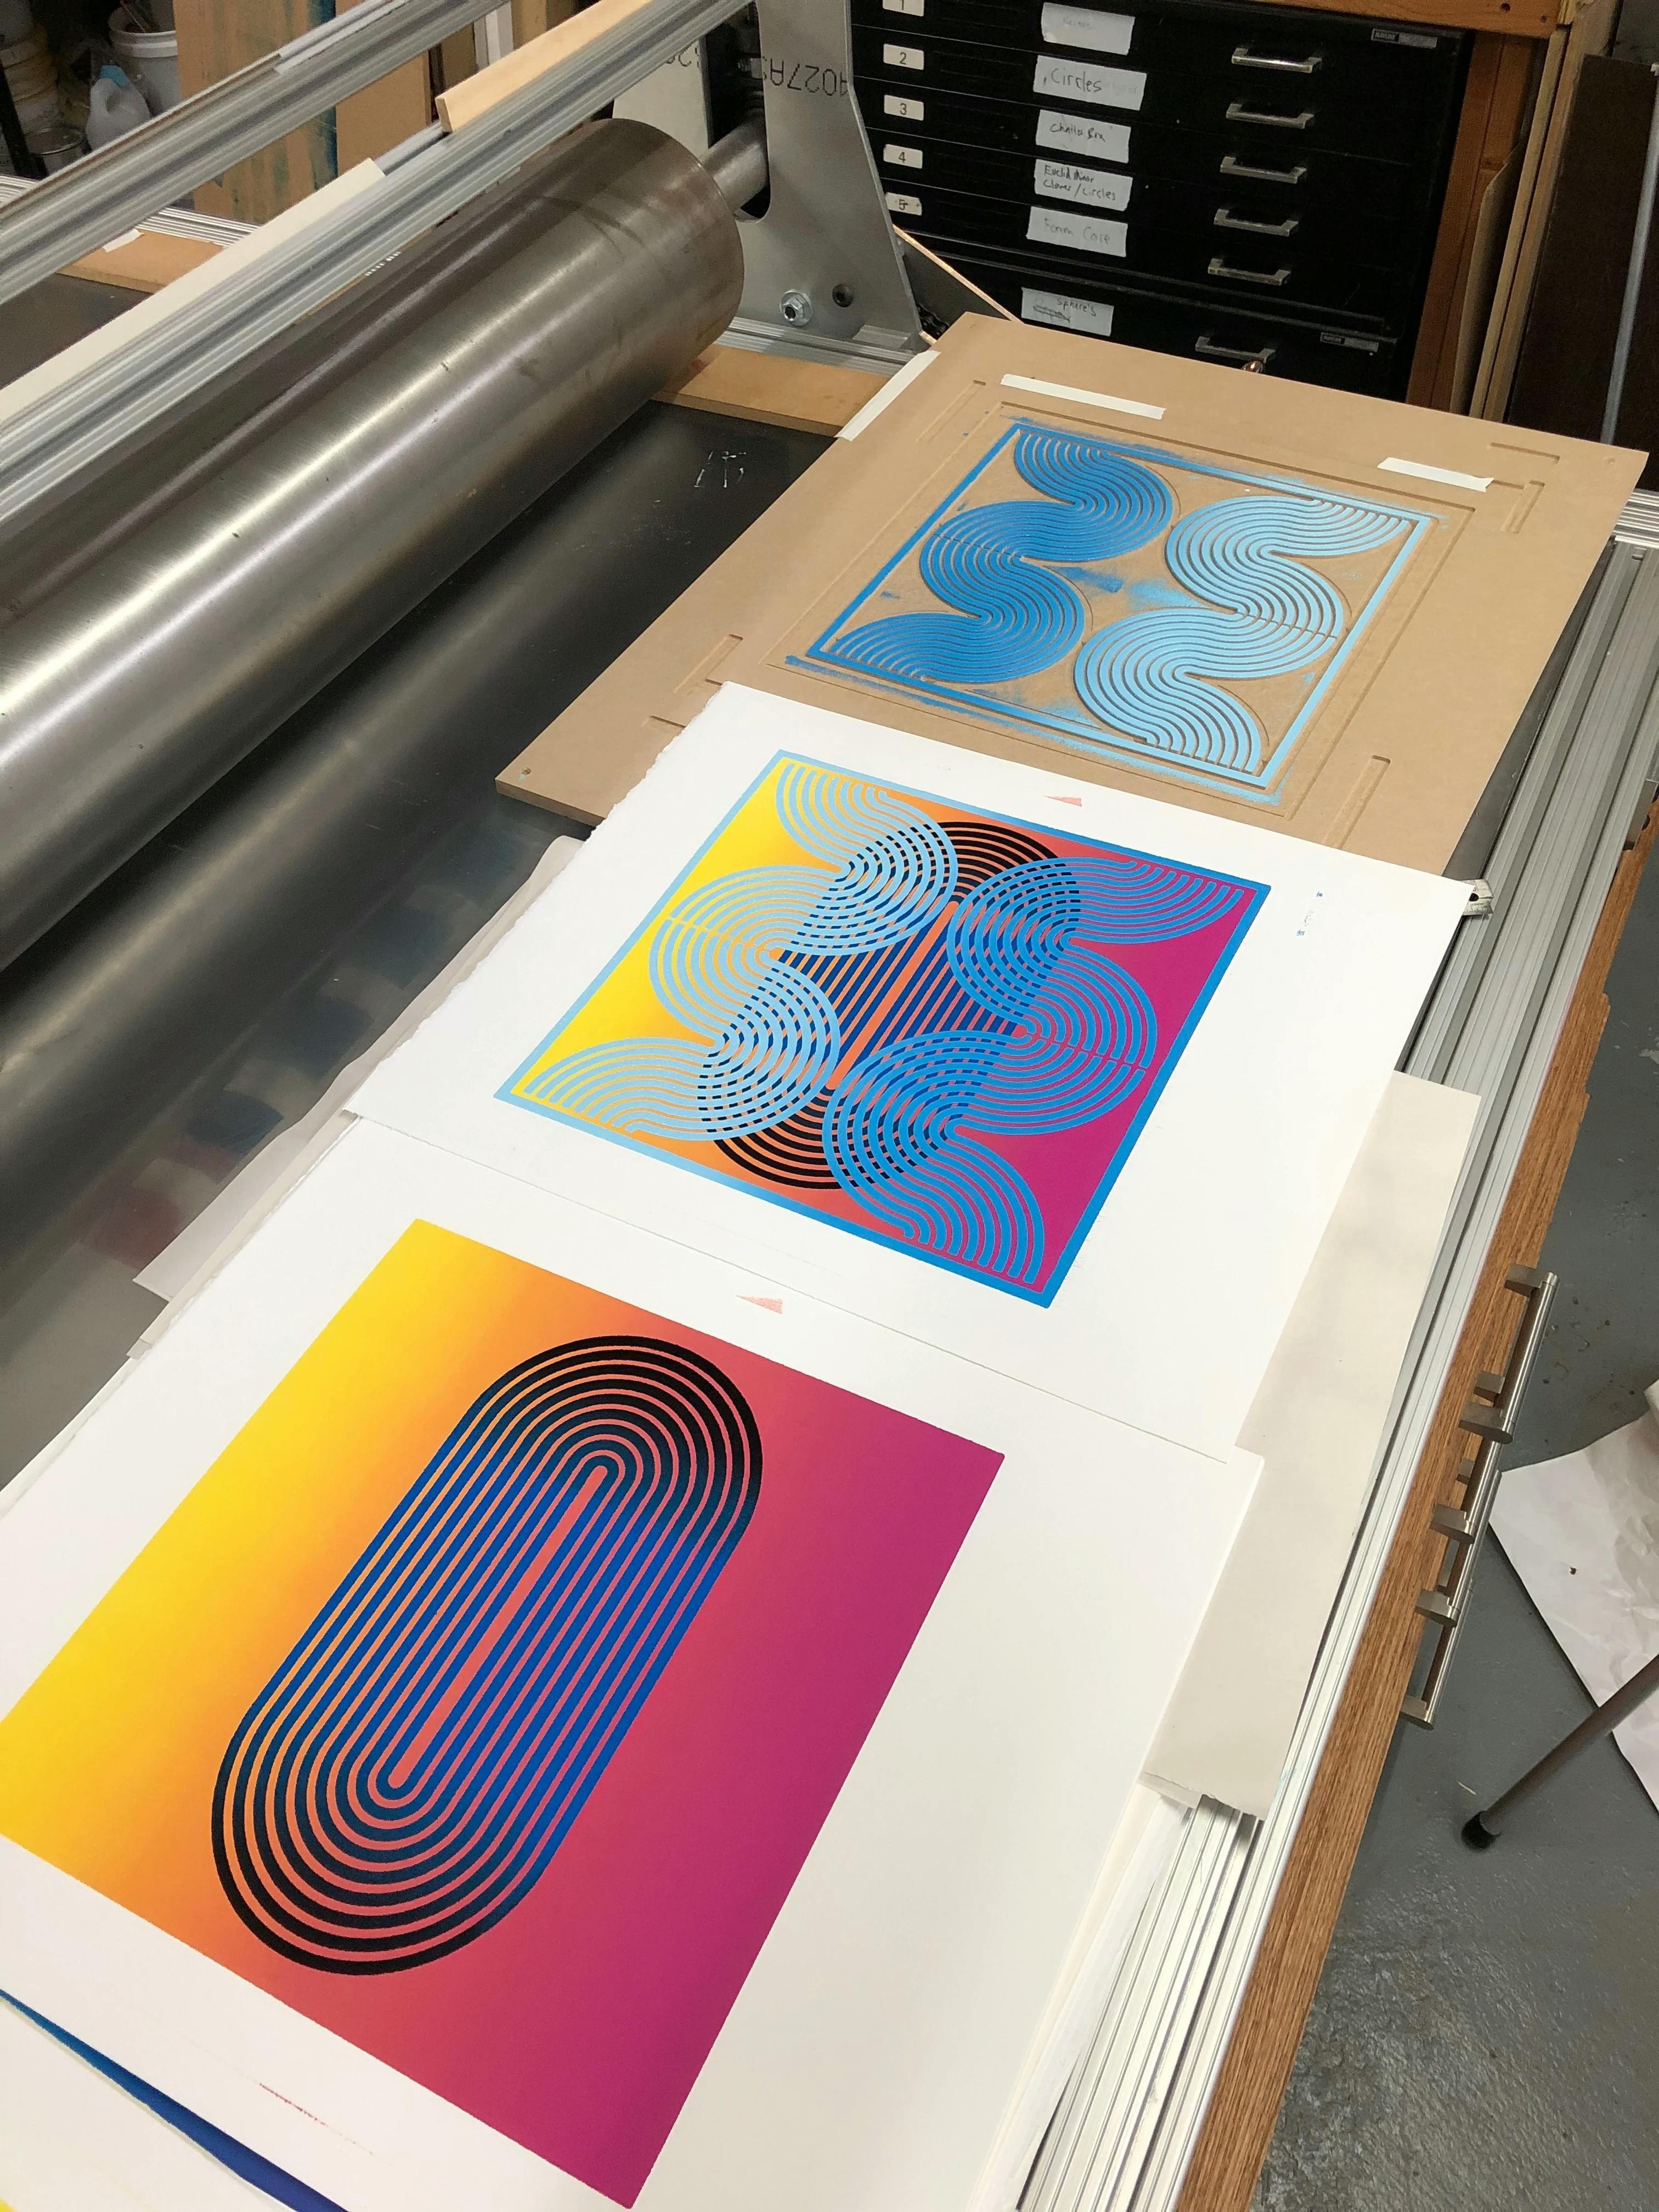 Colorful woodblock prints by artist Matt Neuman laying on top of an etching press in his studio.